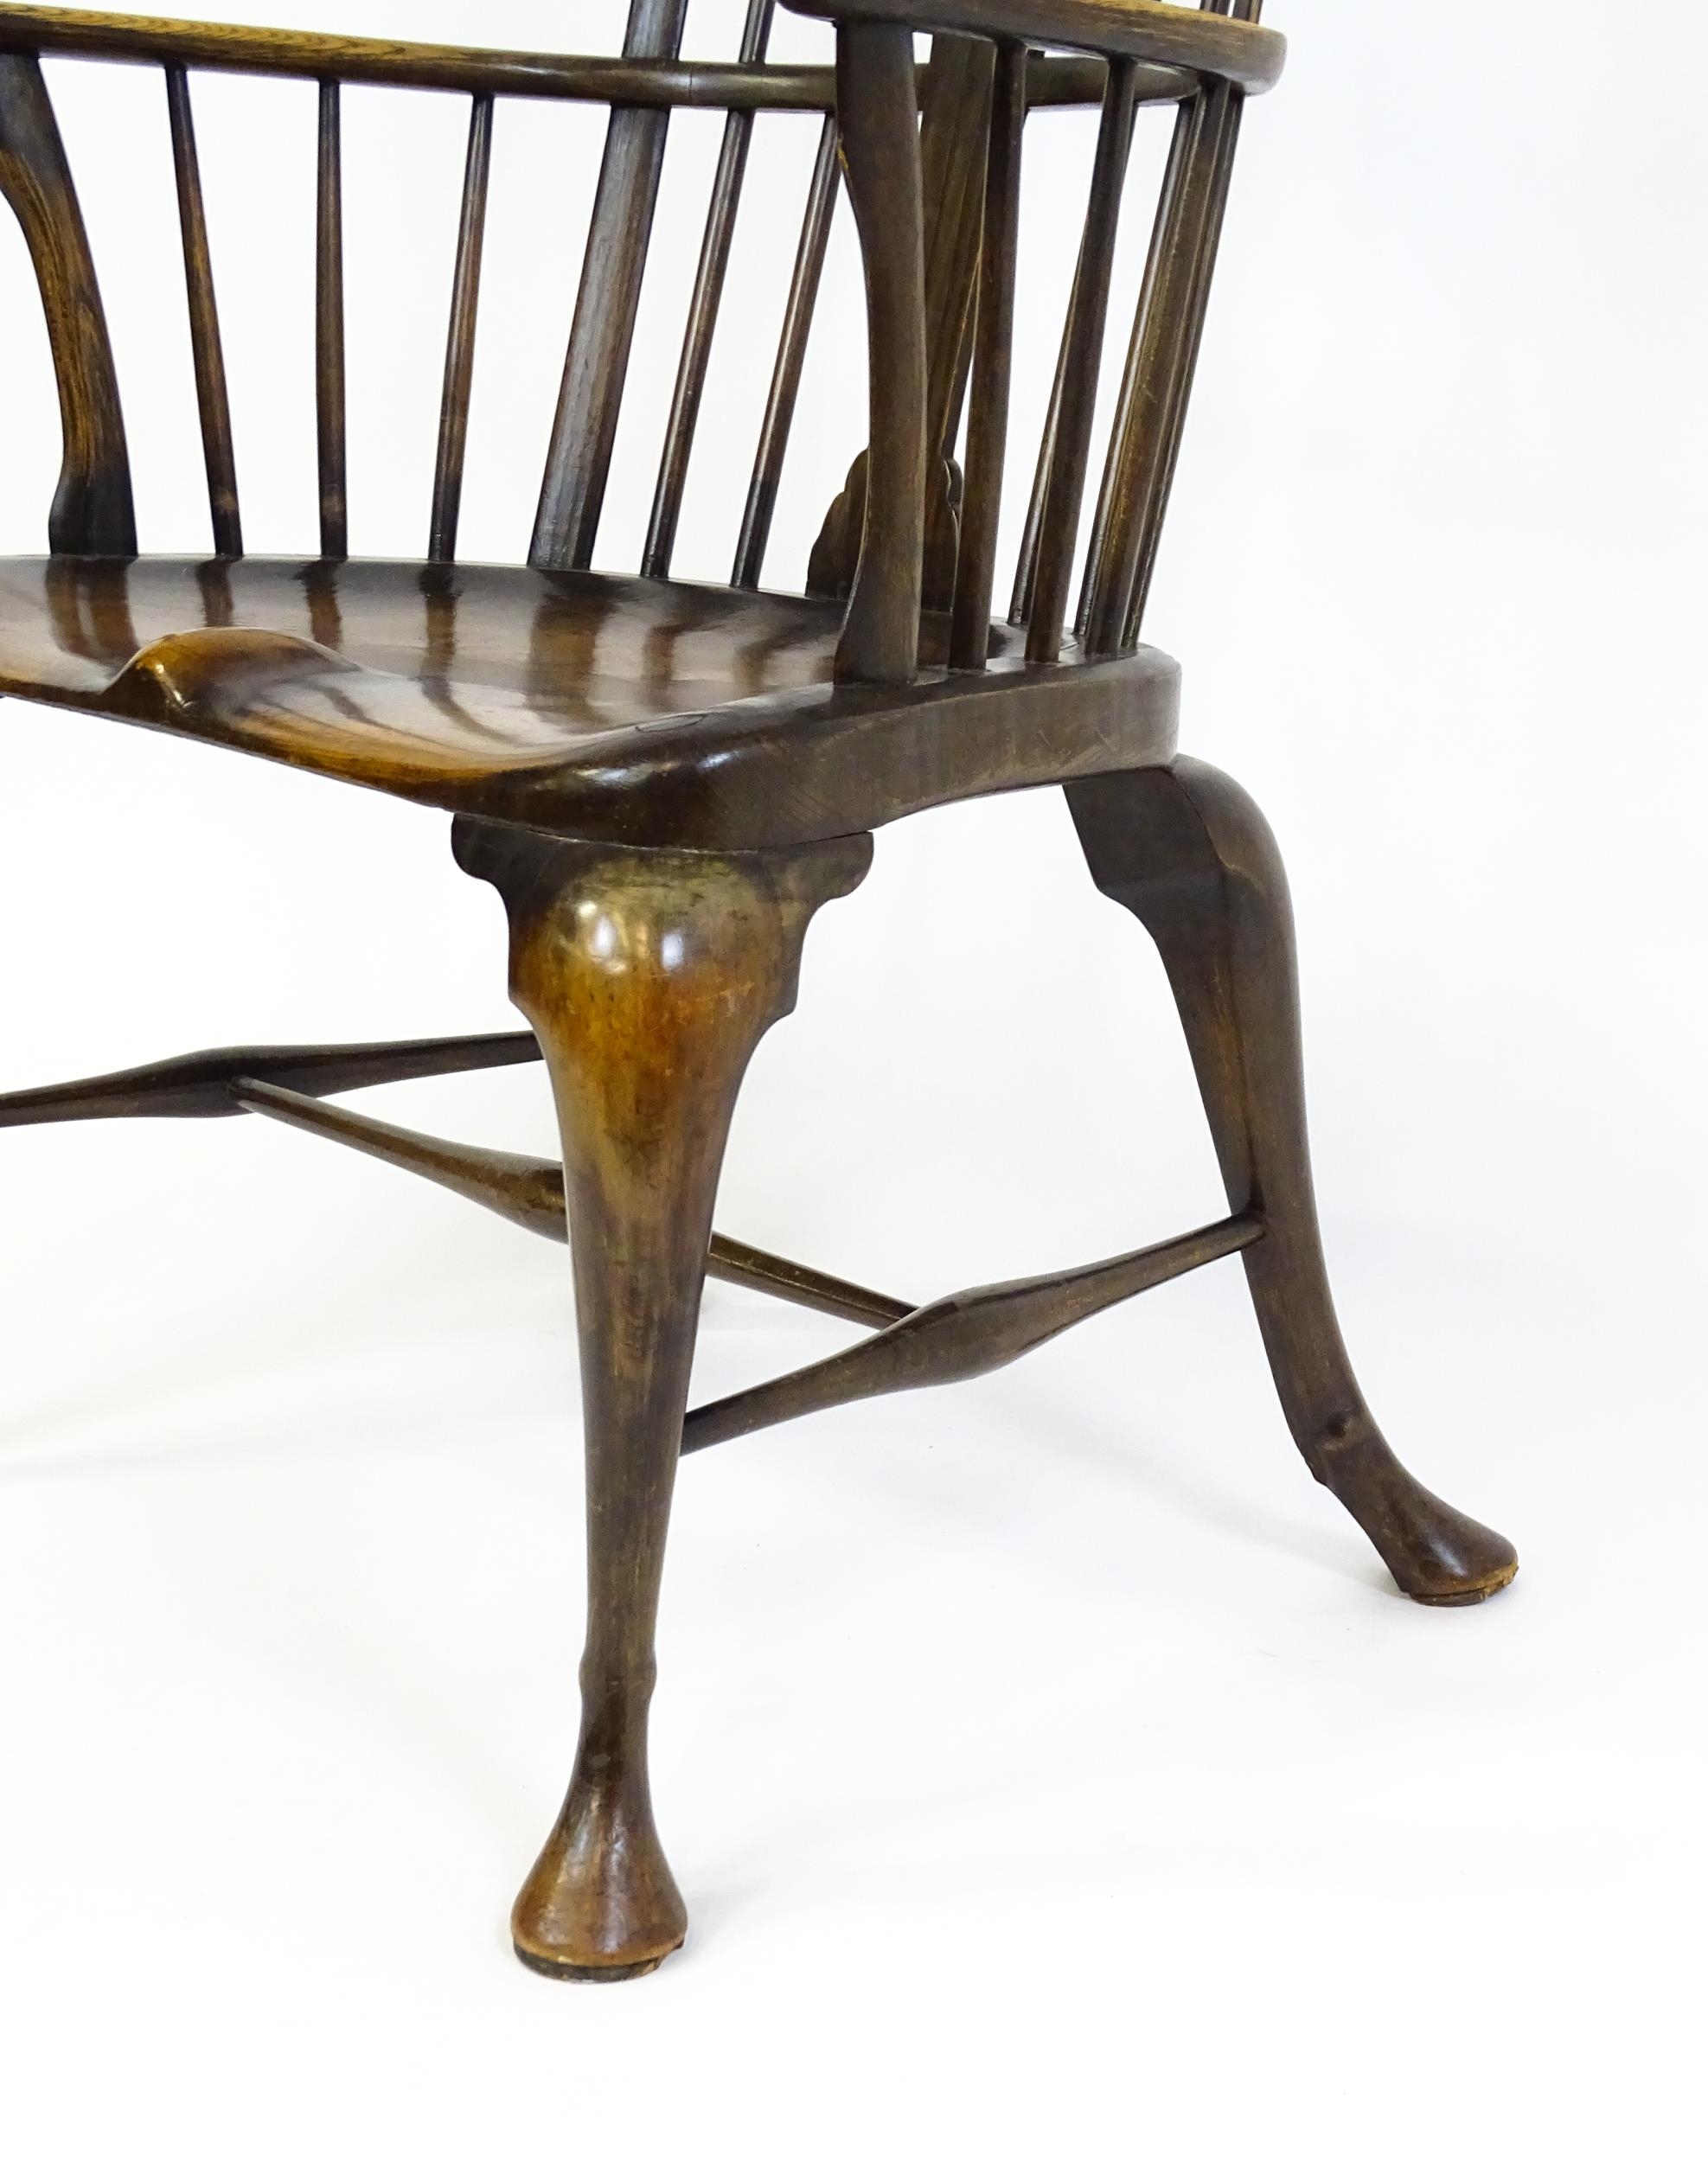 A late 19thC / early 20thC comb back Windsor chair with a vase shaped back splat and an unusually - Image 5 of 6